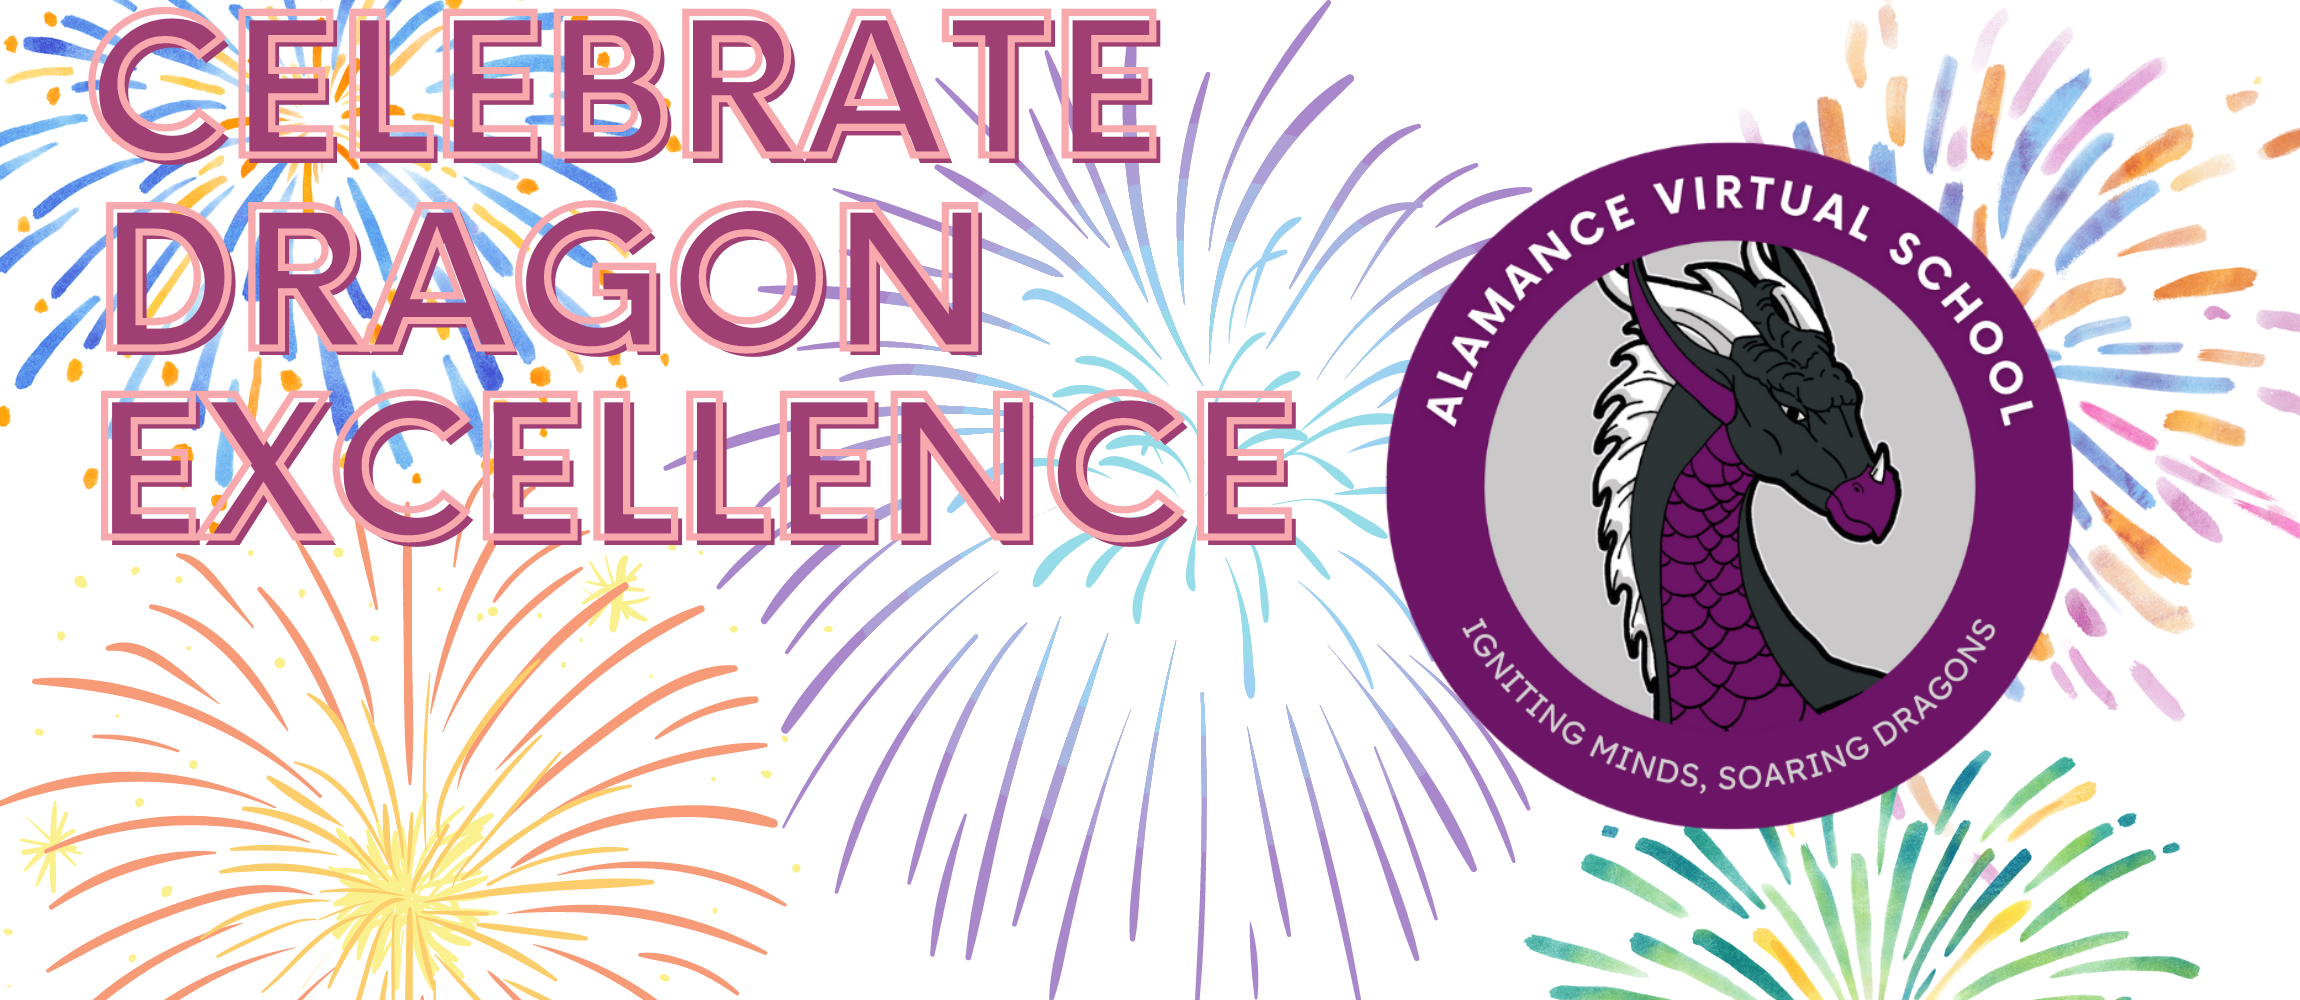 Celebrate Dragon Excellence with fireworks and the AVS logo